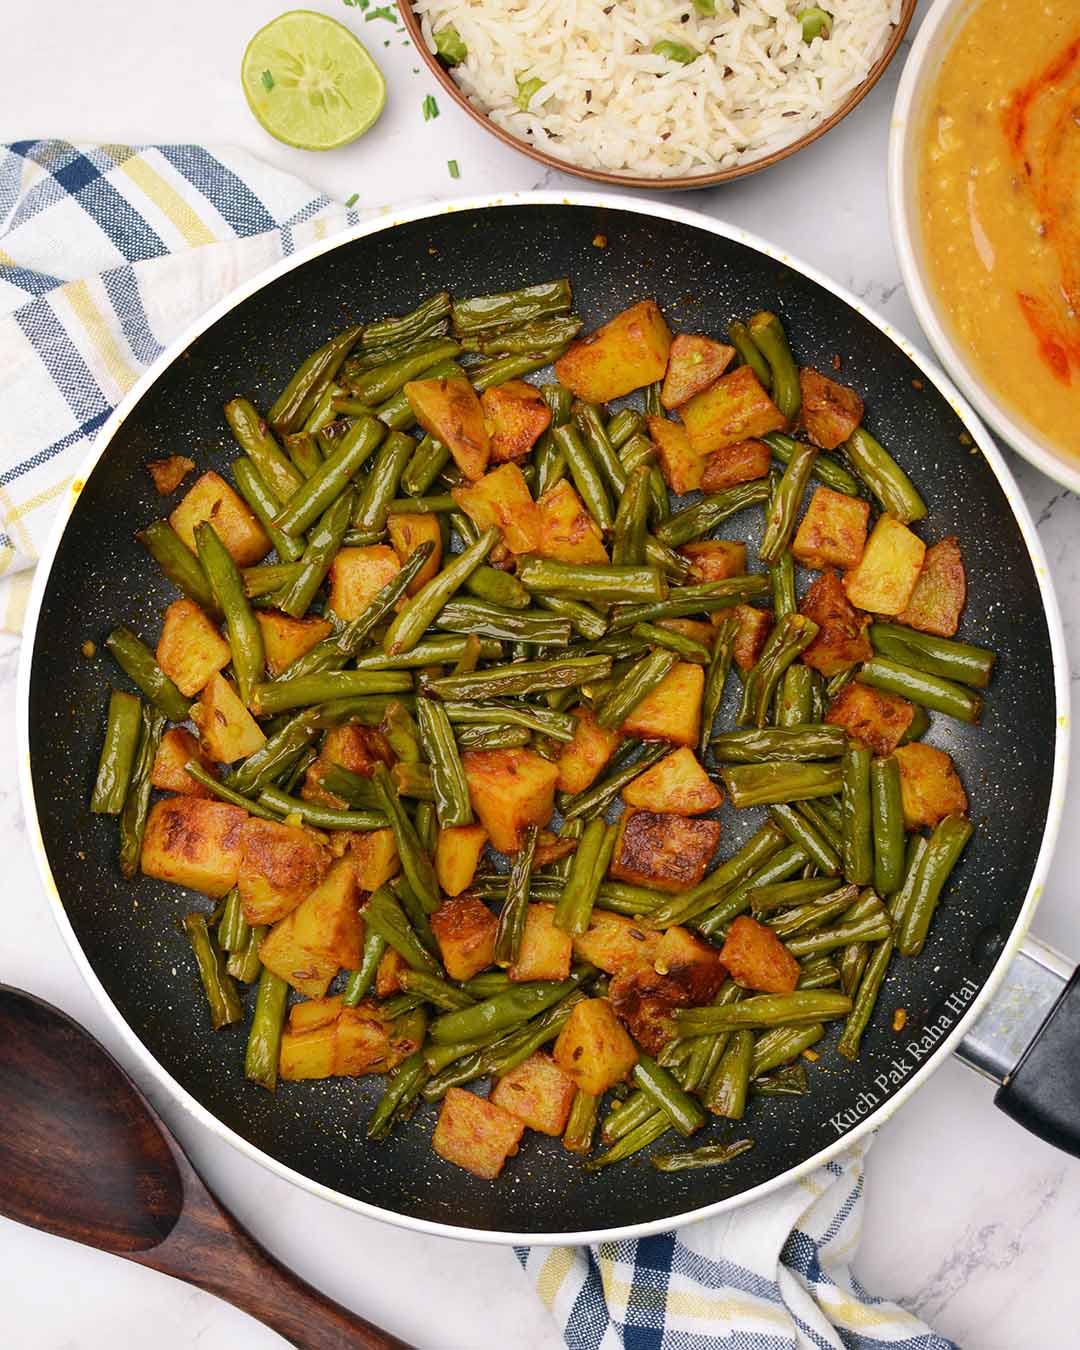 Potato green beans or french beans recipe